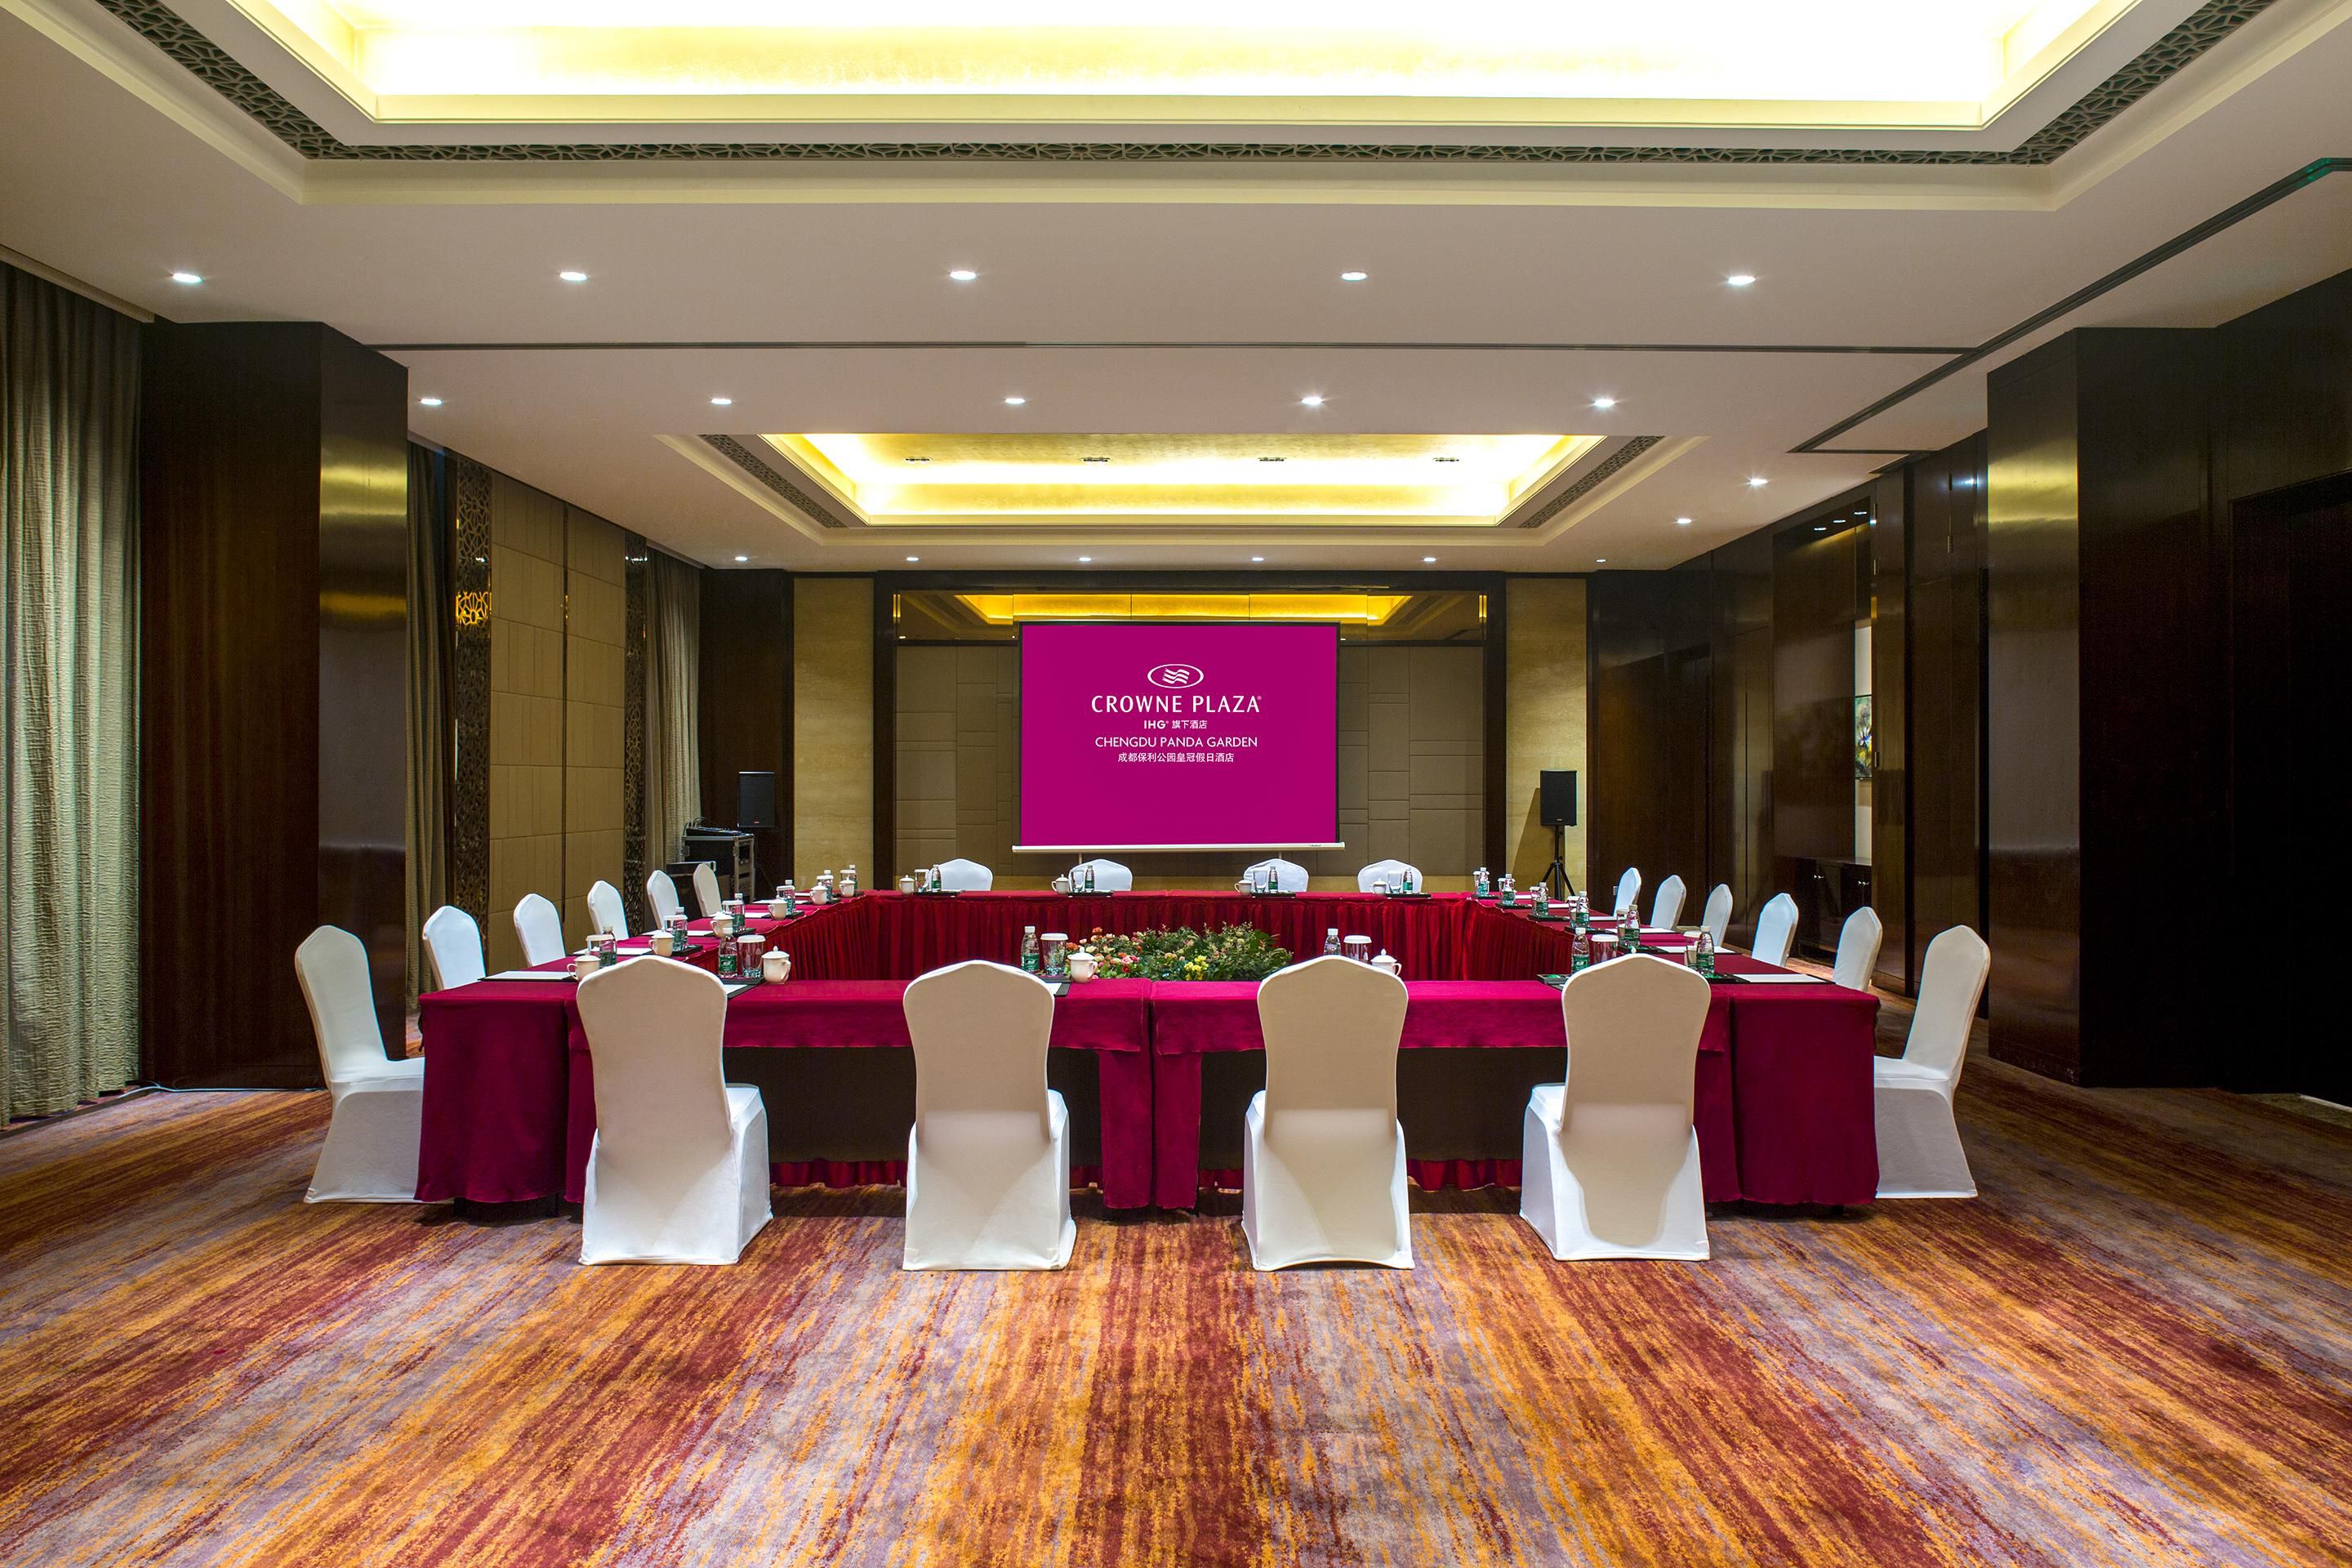 Function rooms for meetings and conference